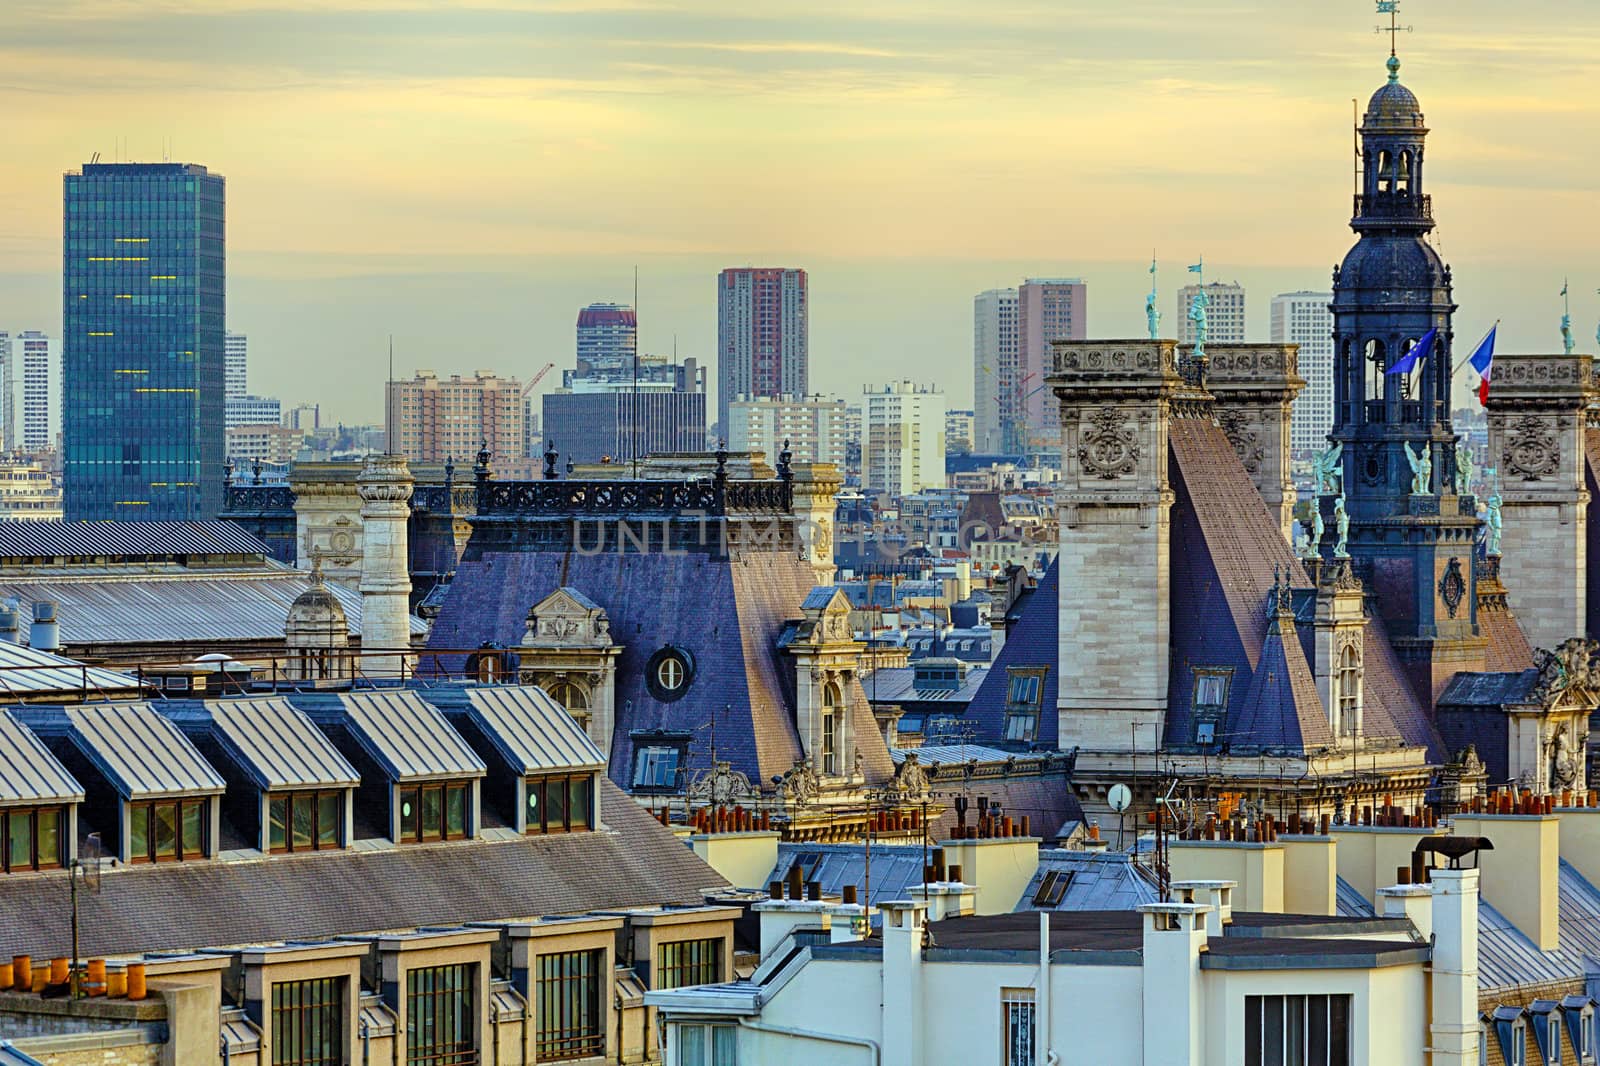 Panorama of Paris seen from Centre Georges-Pompidou